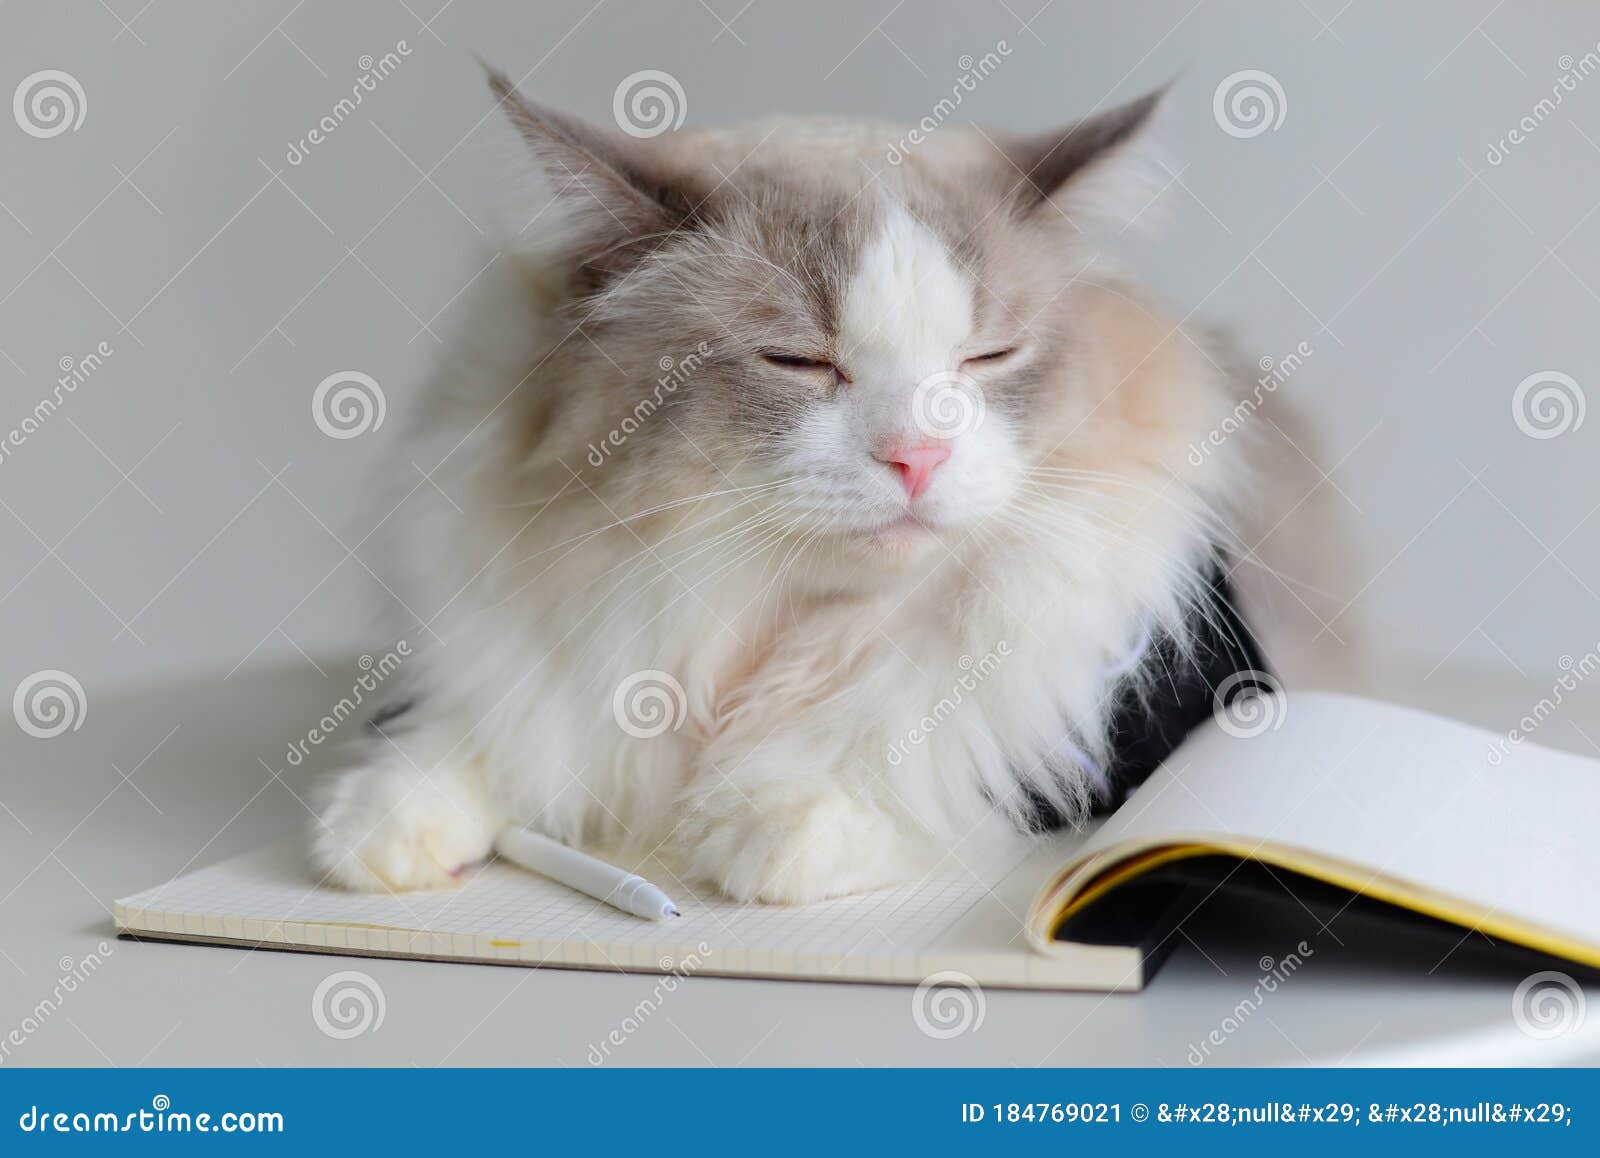 New Creative Cat Photography. Ragdoll Cat Leaning, Face Is Sleepy And